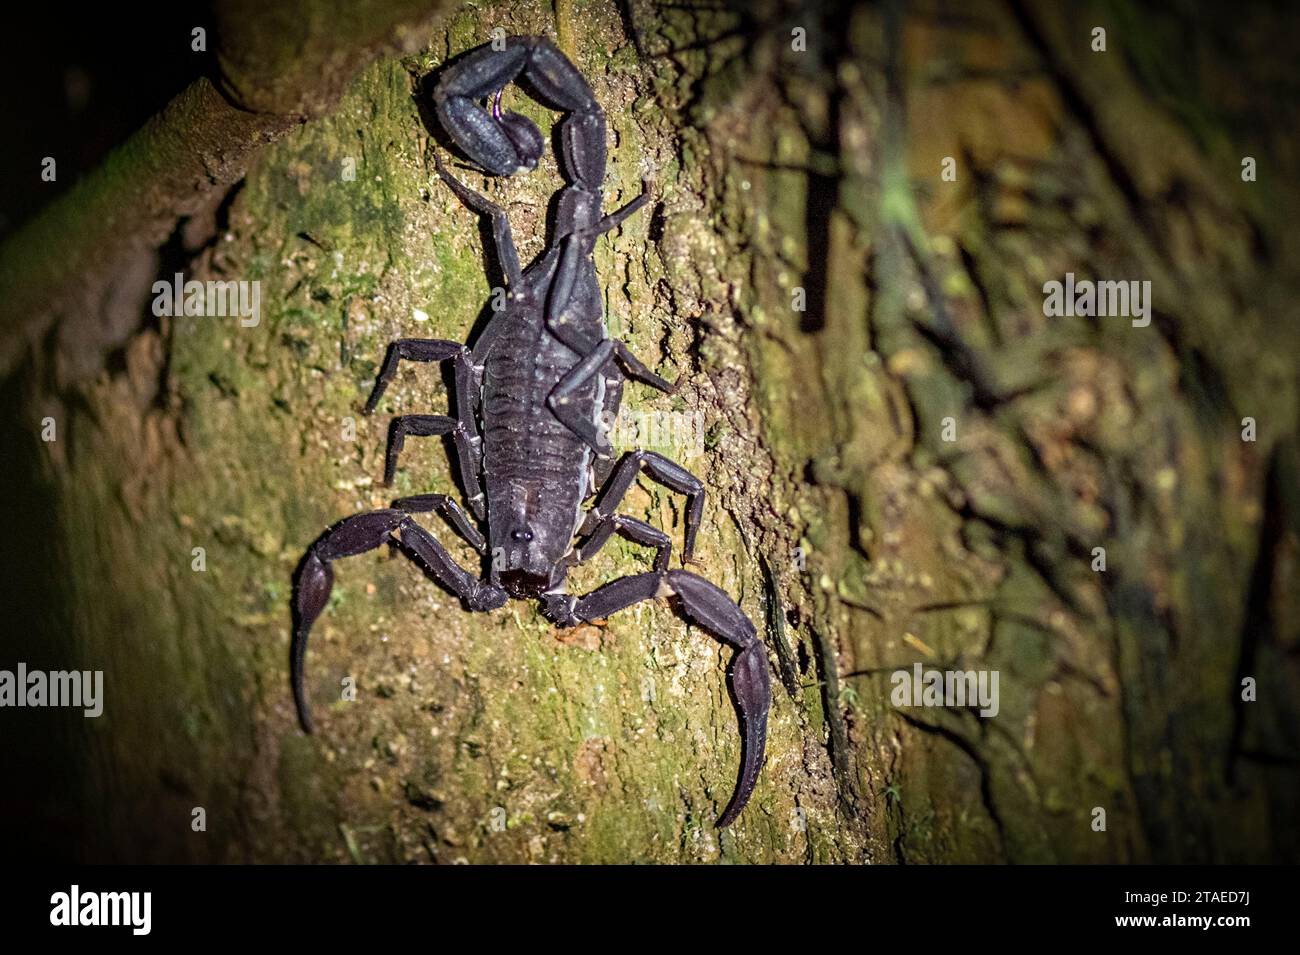 France, French Guiana, Saint-Laurent-du-Maroni, on the Voltaire Falls trail, here a night view of a Tityus obscurus scorpion Stock Photo